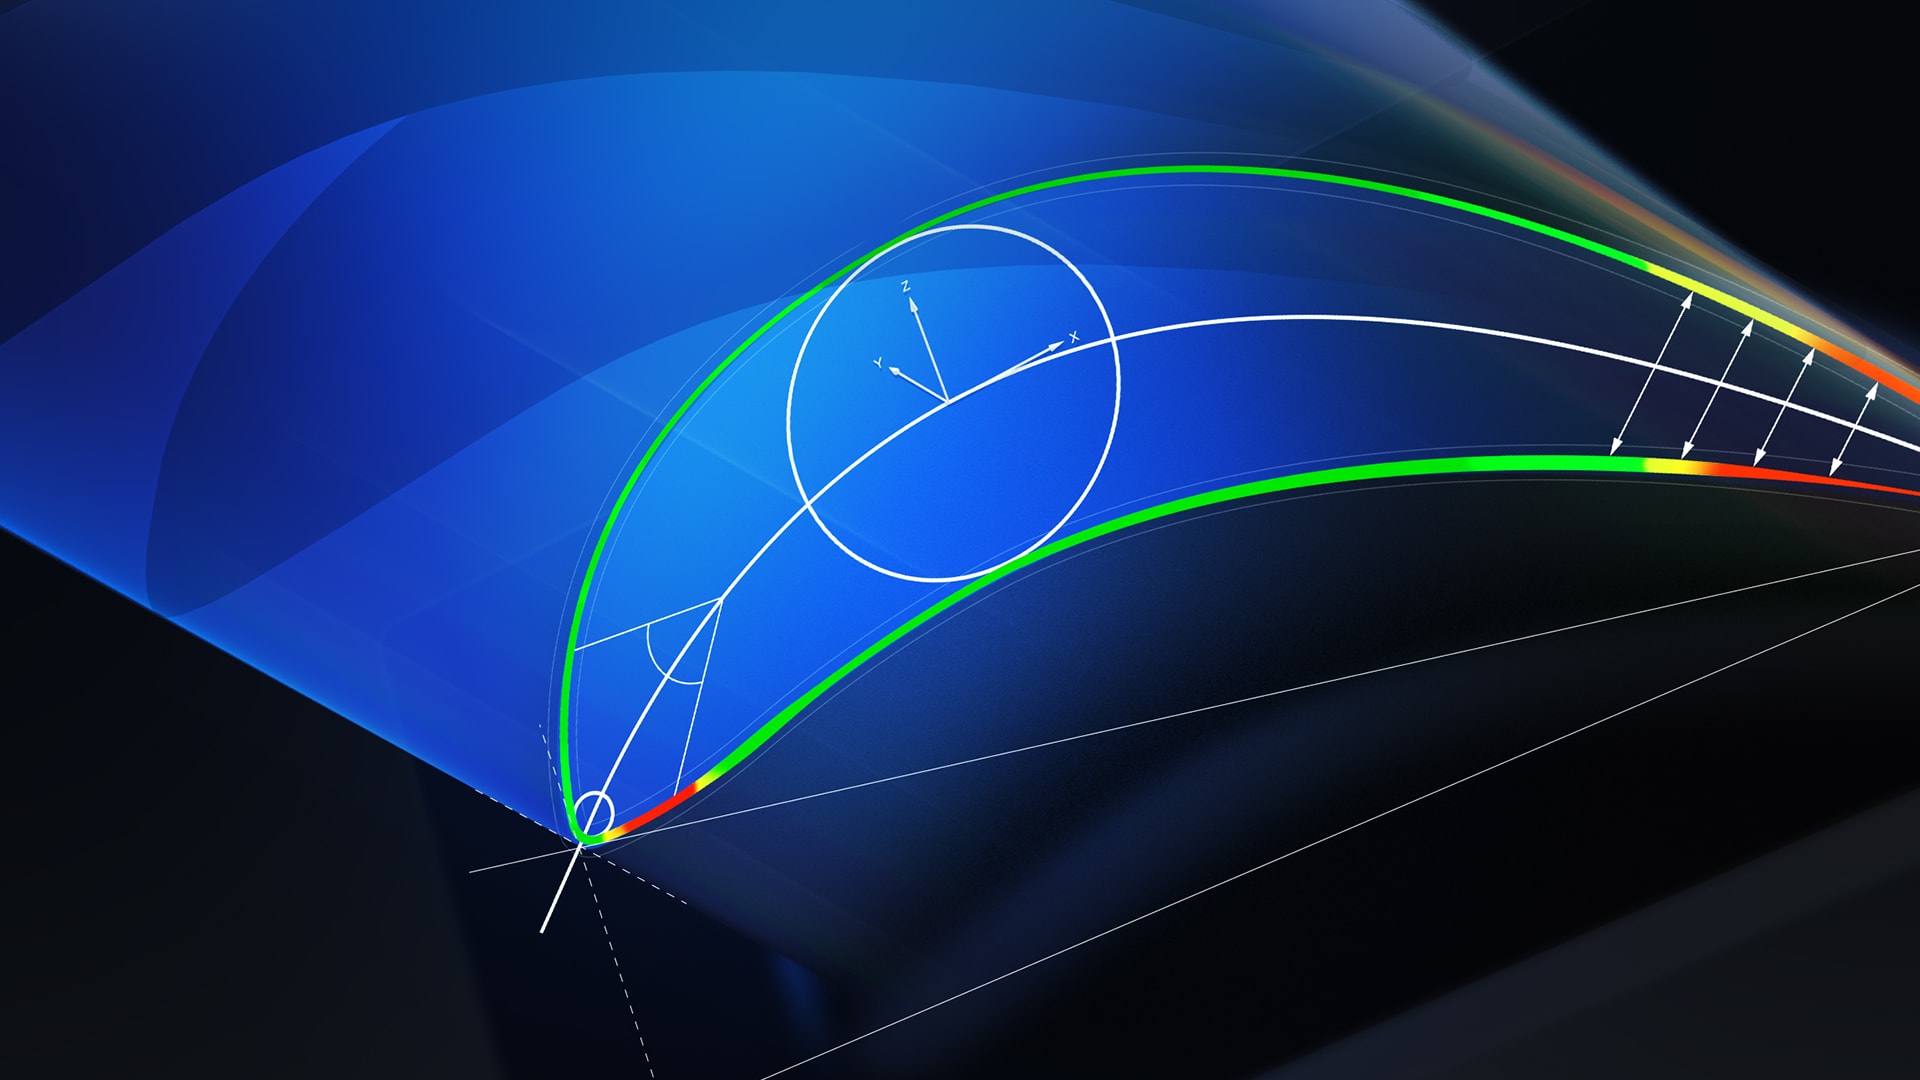 ZEISS INSPECT Airfoil: Dimensional inspection on the cross section of an airfoil 